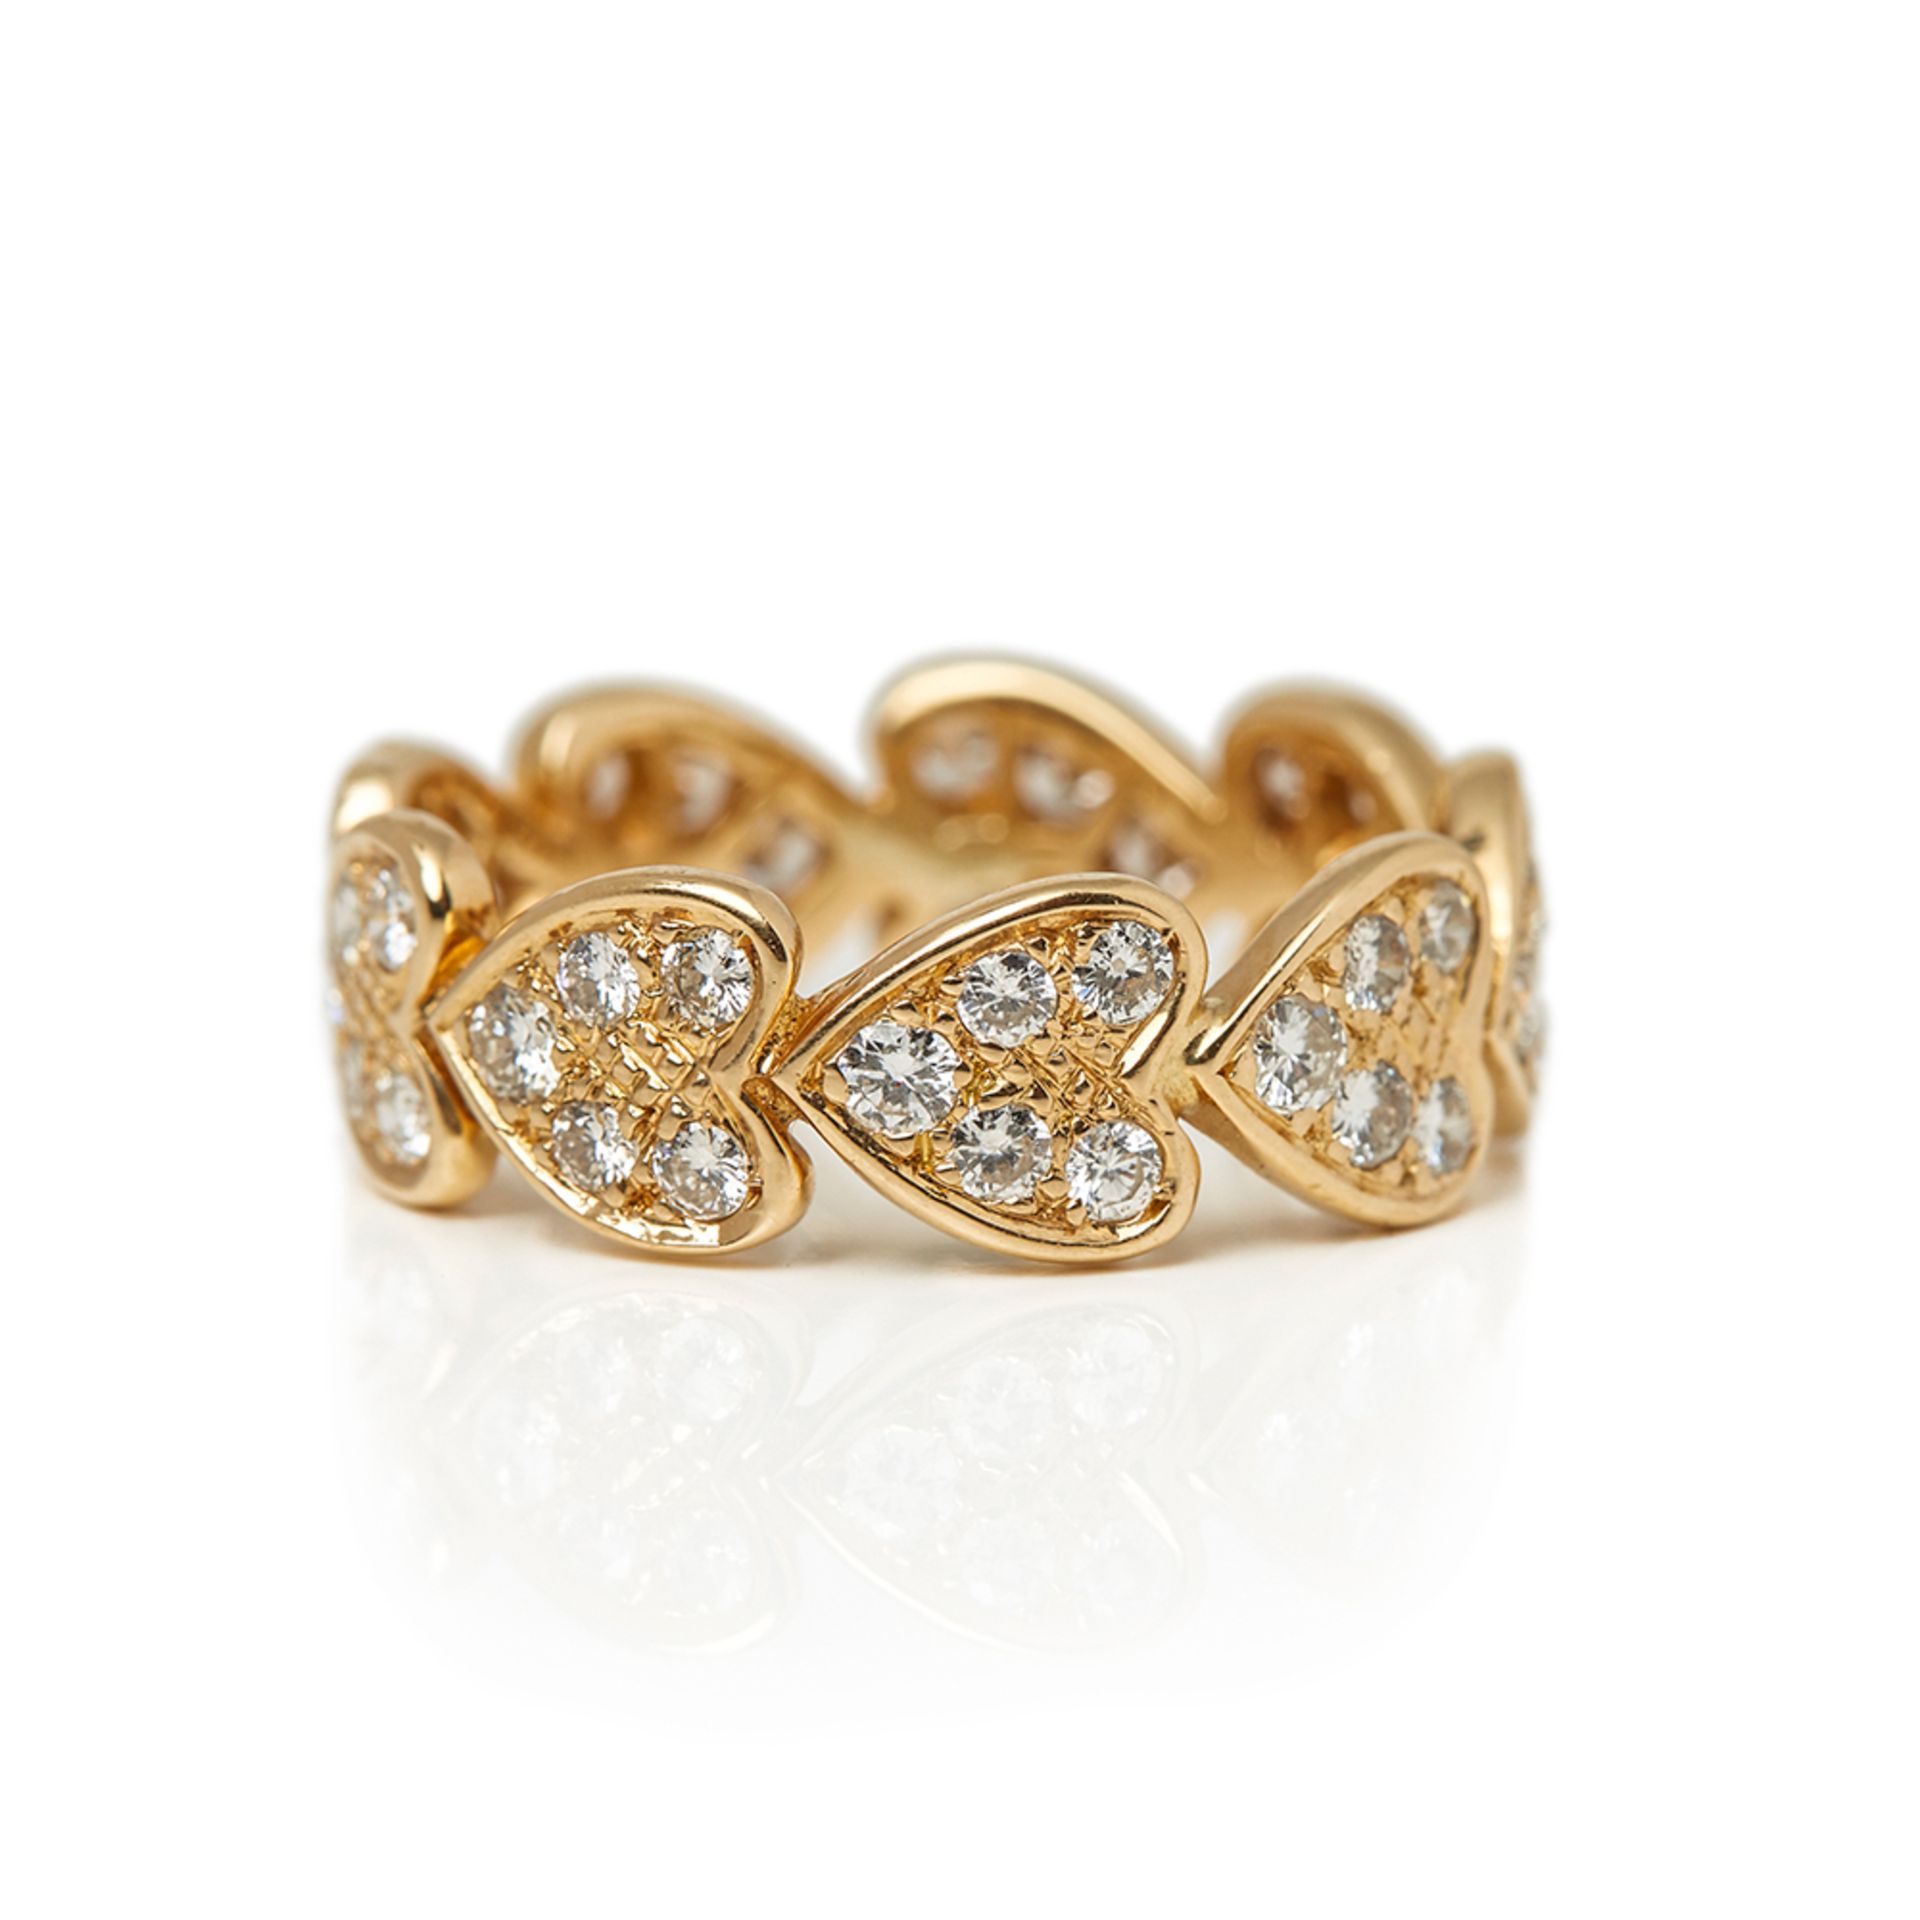 Cartier 18k Yellow Gold Diamond Heart Ring - Image 6 of 23